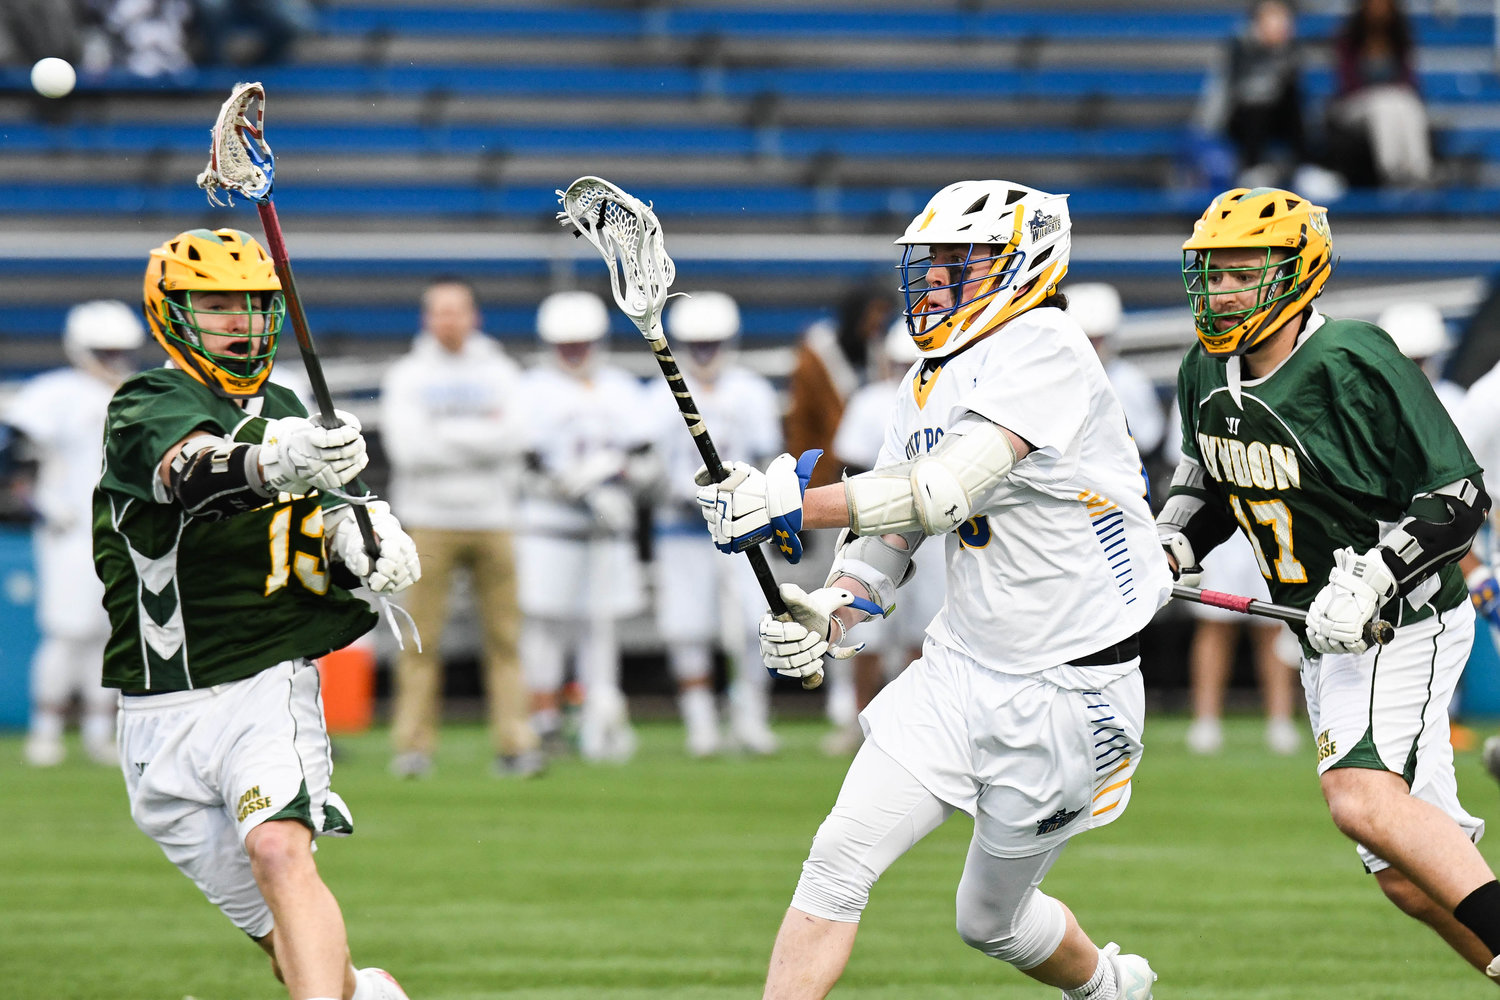 HAT TRICK — SUNY Poly player Shane Wyman takes a shot against Northern Vermont-Lyndon during the lacrosse game on Friday. The host Wildcats won 20-2 and Wyman had a hat trick.